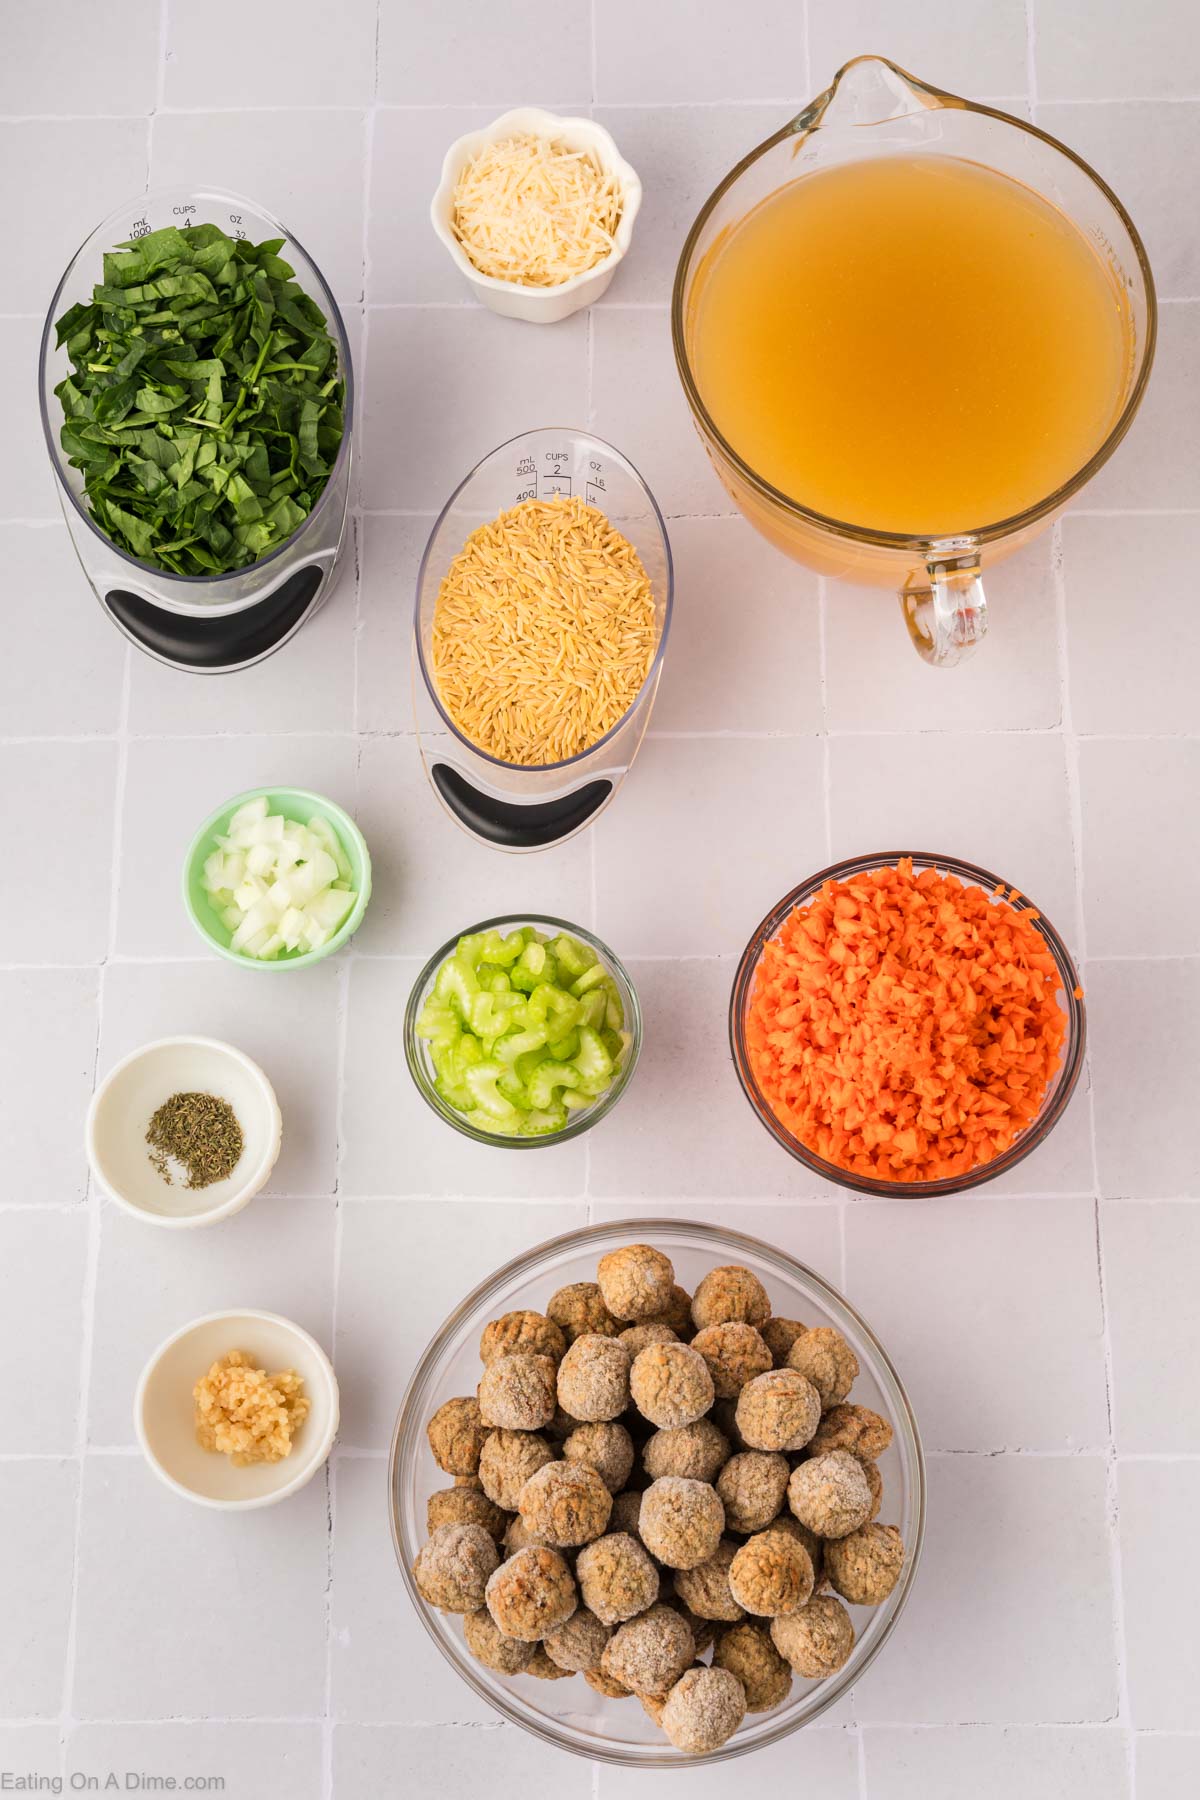 Italian Wedding Soup ingredients - chicken meatballs, onion, carrots, celery, garlic, thyme, broth, orzo pasta, spinach, parmesan cheese